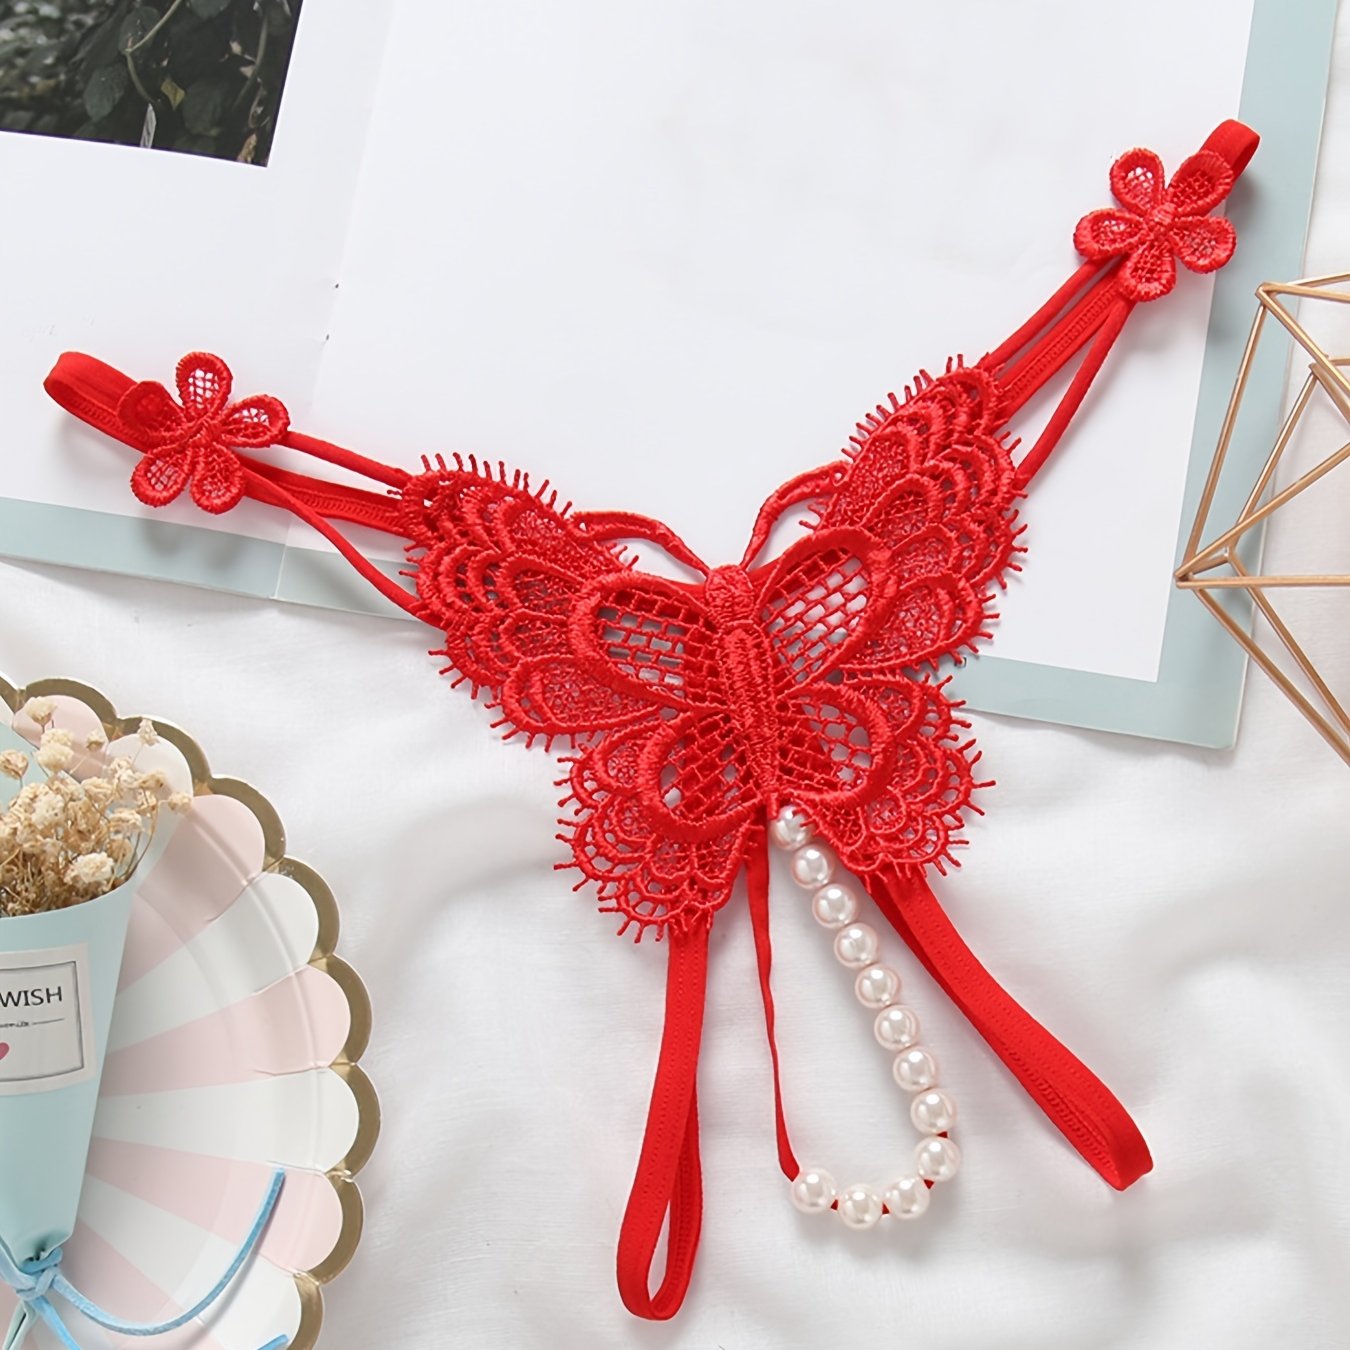 Briefs Panties New Sexy String Lace Underwear Women Butterfly Panties Women G  String T Back Thong Transparent Lingerie Cute With Pearls Panties T230601  From Mengyang02, $5.05